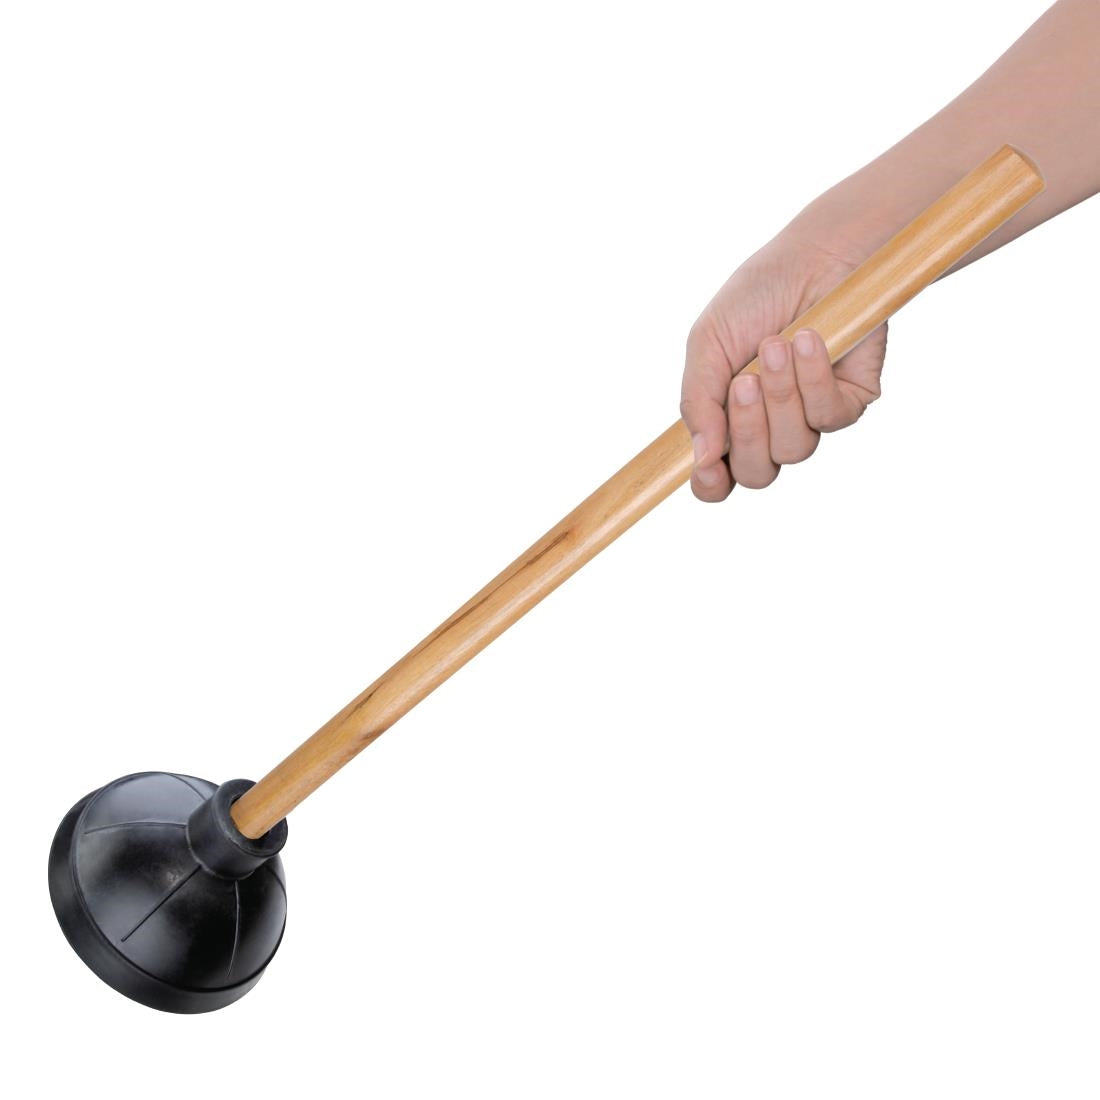 Jantex Plunger With Wooden Handle JD Catering Equipment Solutions Ltd